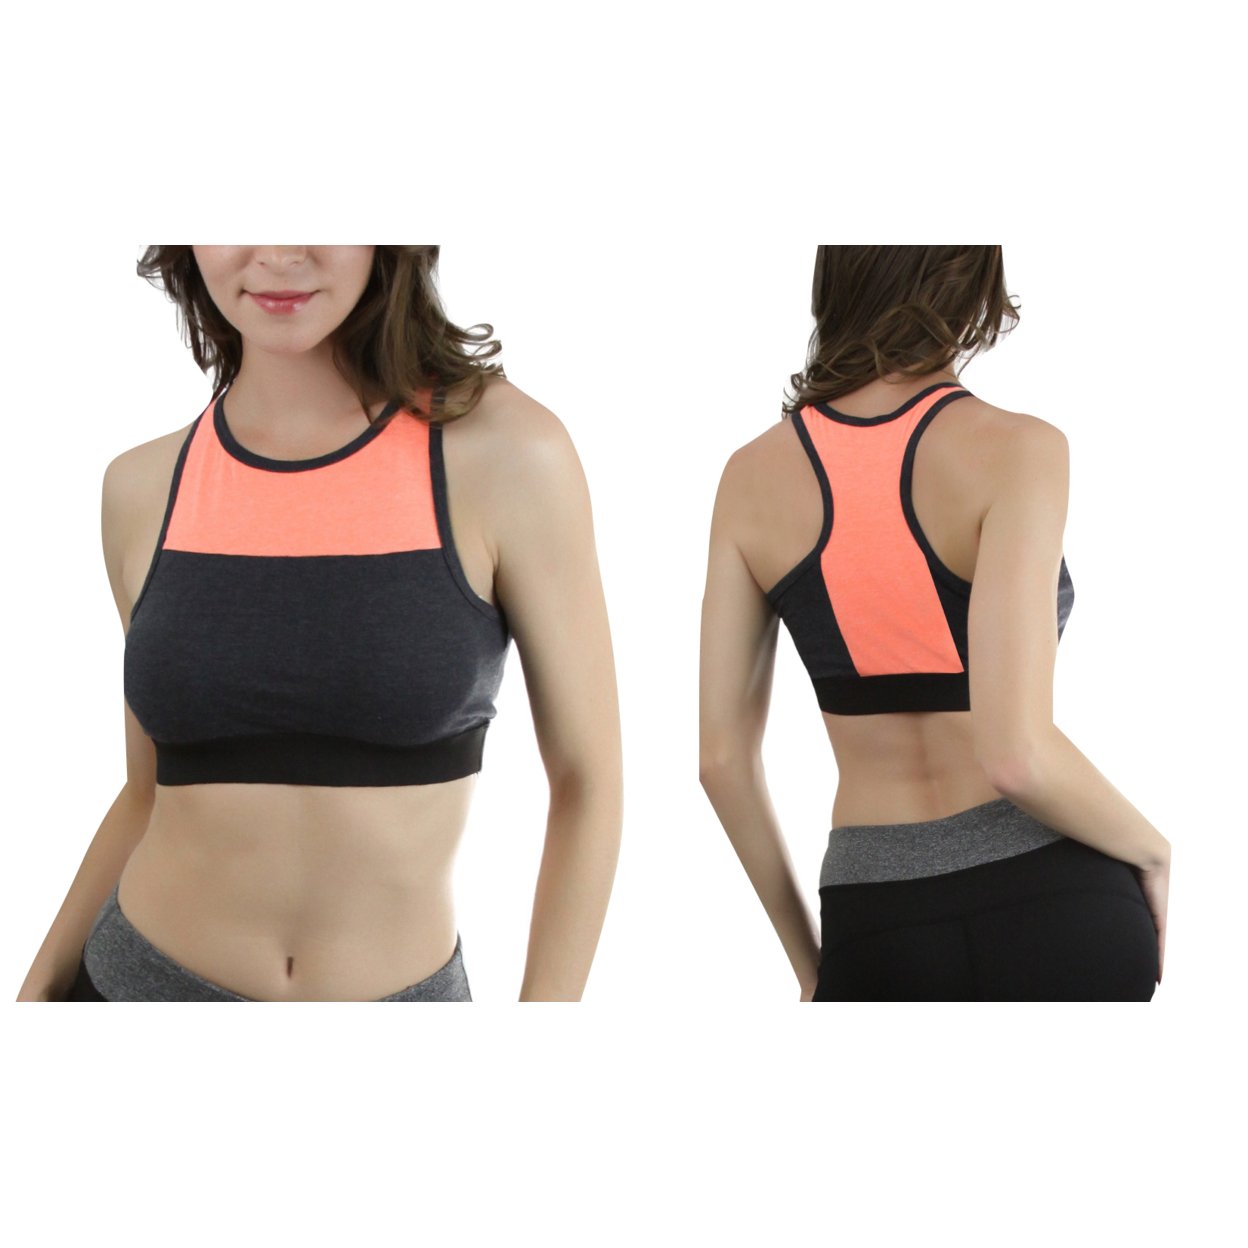 Single Or 2-Pack Of Women's Color-Block Two Tone Cotton-Blend Bra - Charcoal/Neon Coral, Large